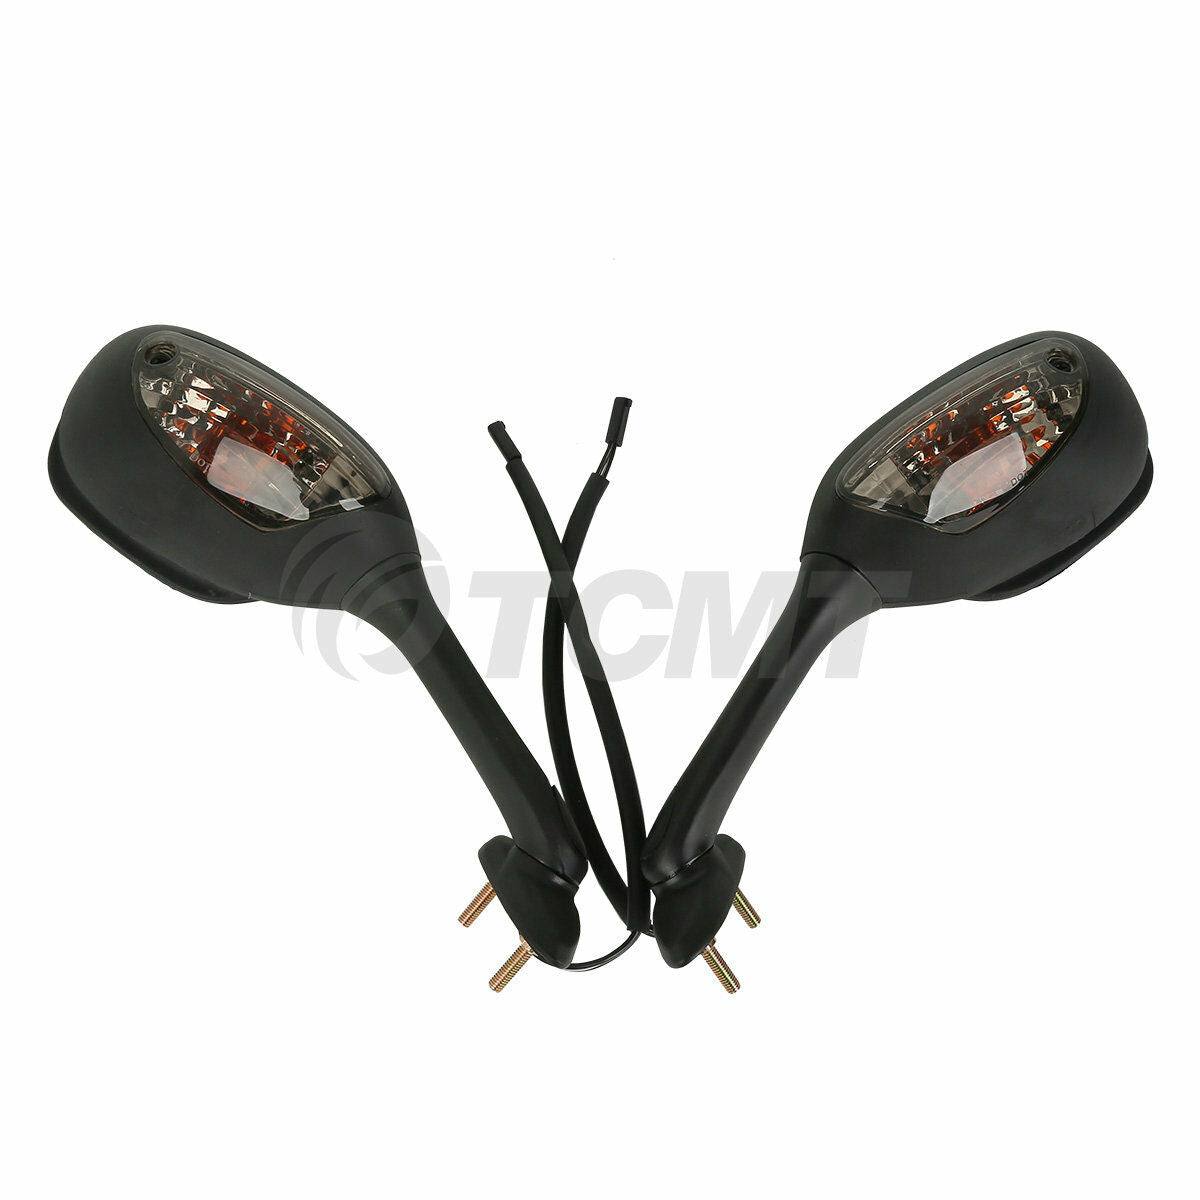 Rearview Side Mirrors W/ Turn Signals Fit For Suzuki GSXR600 GSXR750 2006-2021 - Moto Life Products